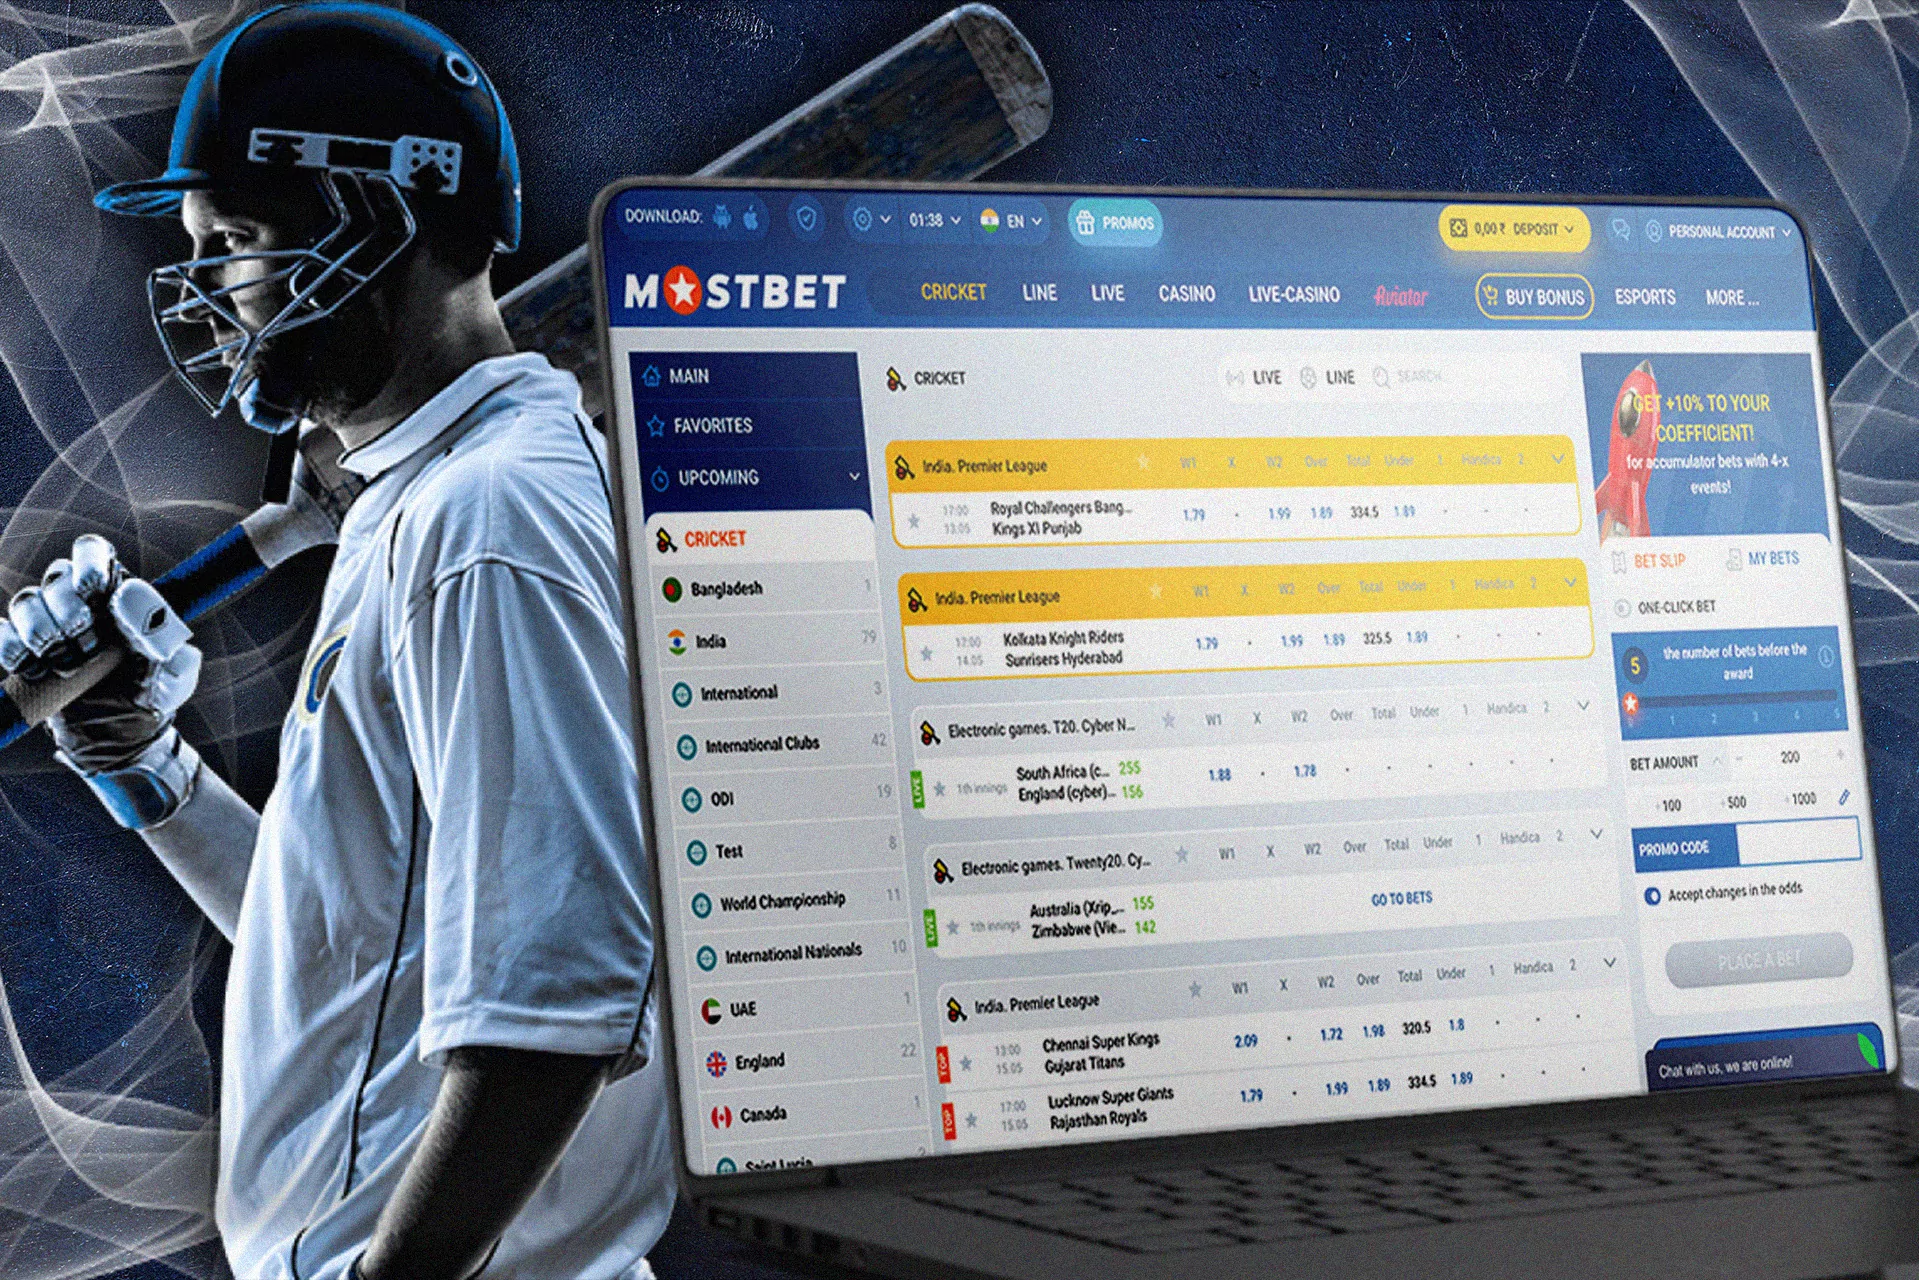 Place cricket bets on the official website of Mostbet.